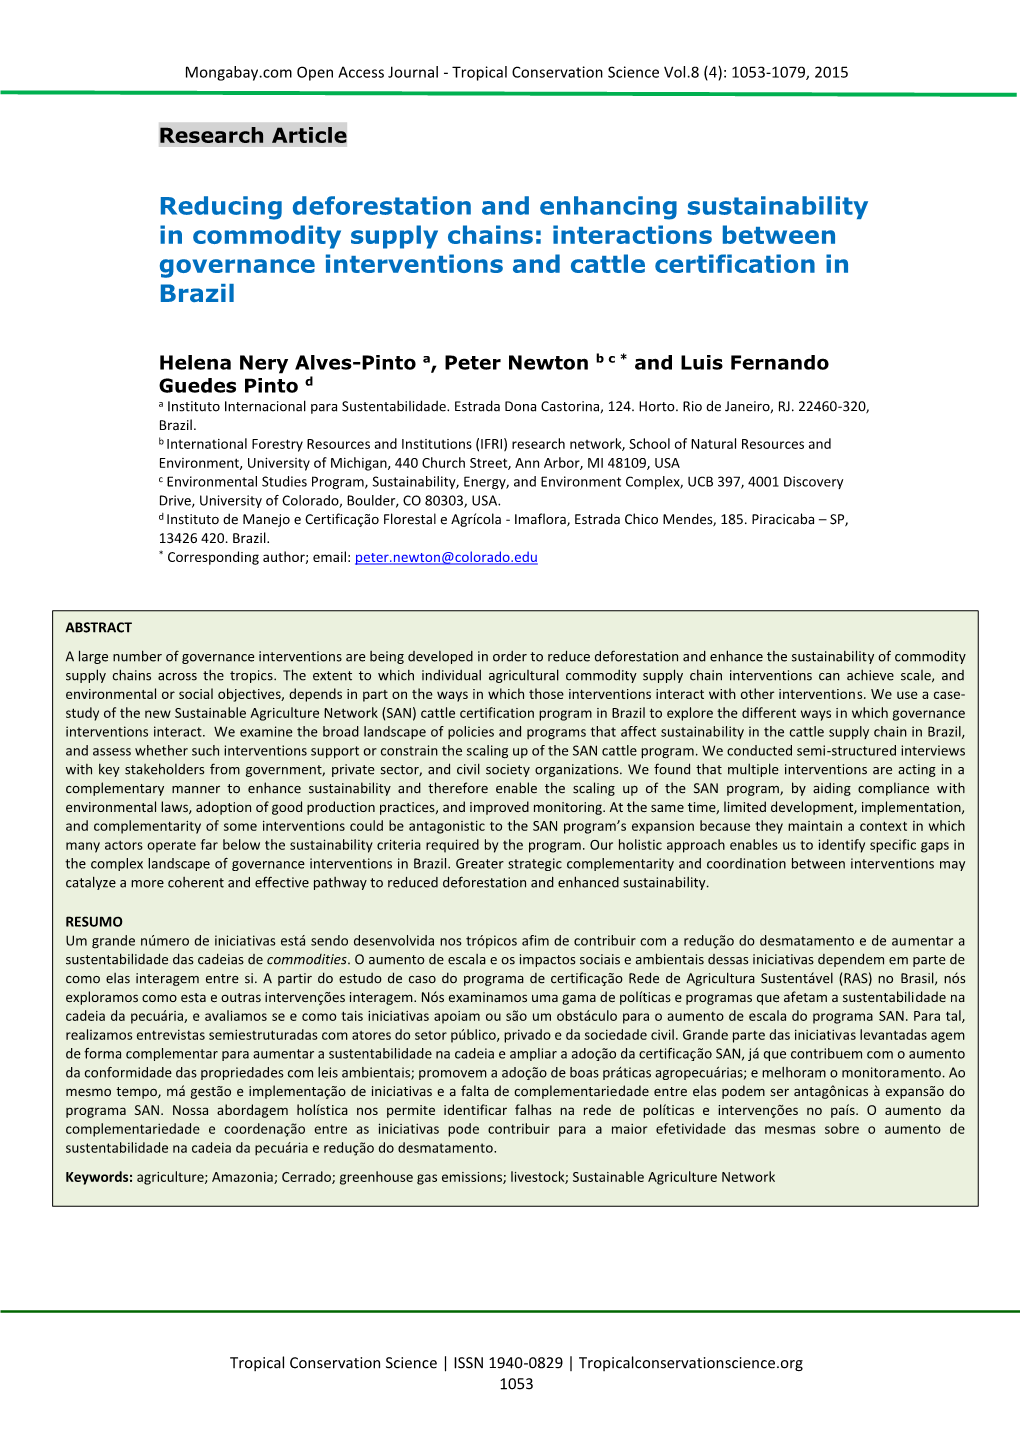 Interactions Between Governance Interventions and Cattle Certification in Brazil